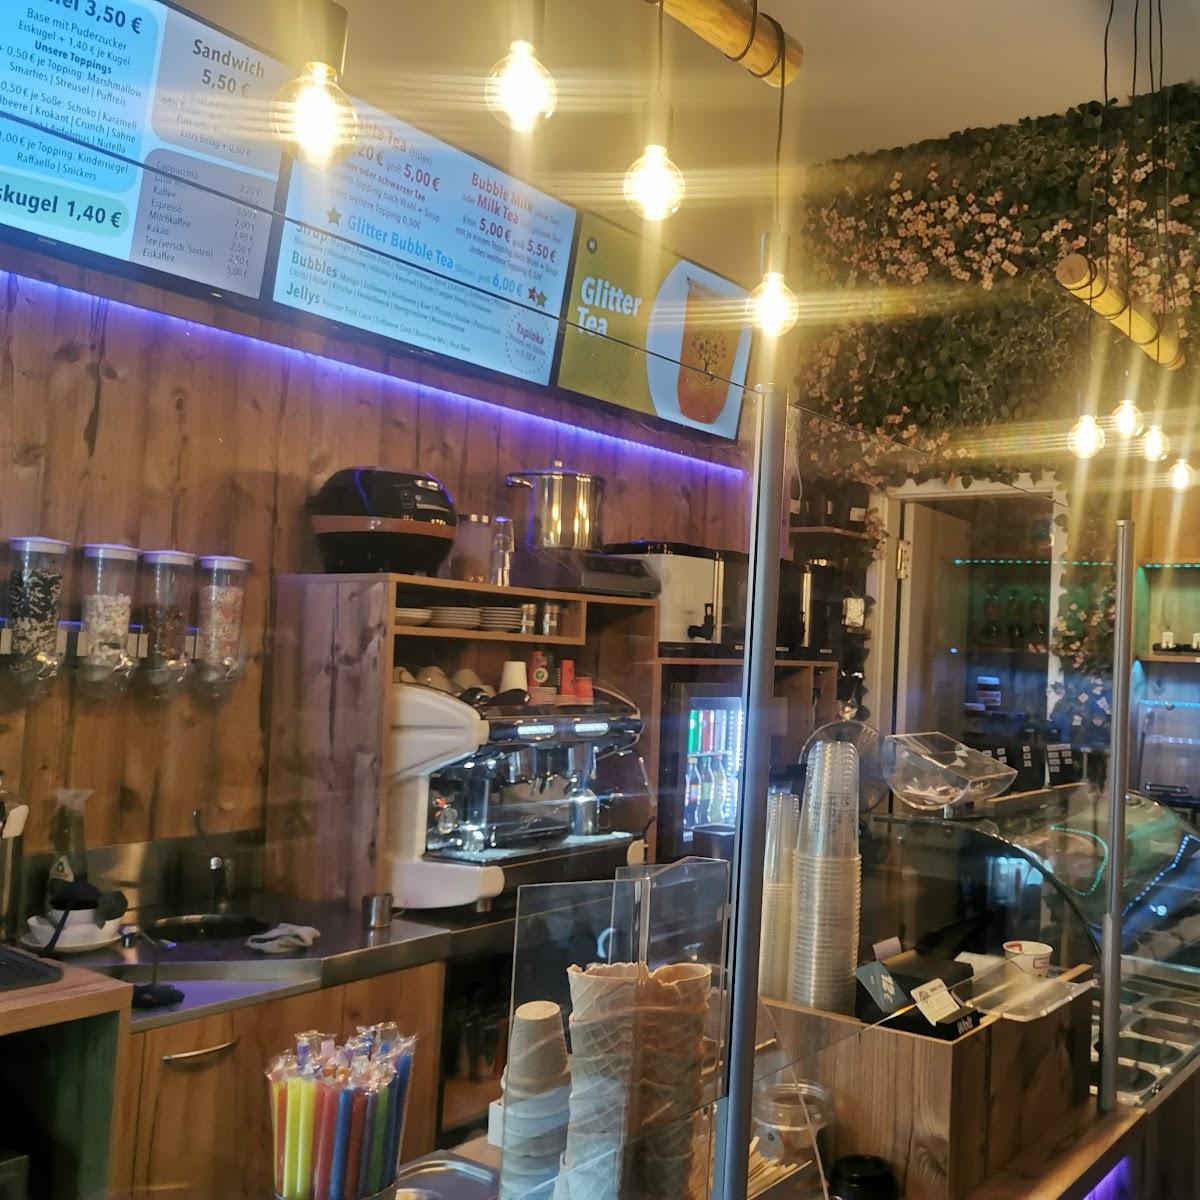 Restaurant "Bubble Tree Sandwiches,Bowl Salate,Waffel, Crêpes, Kaffee and more" in Berlin